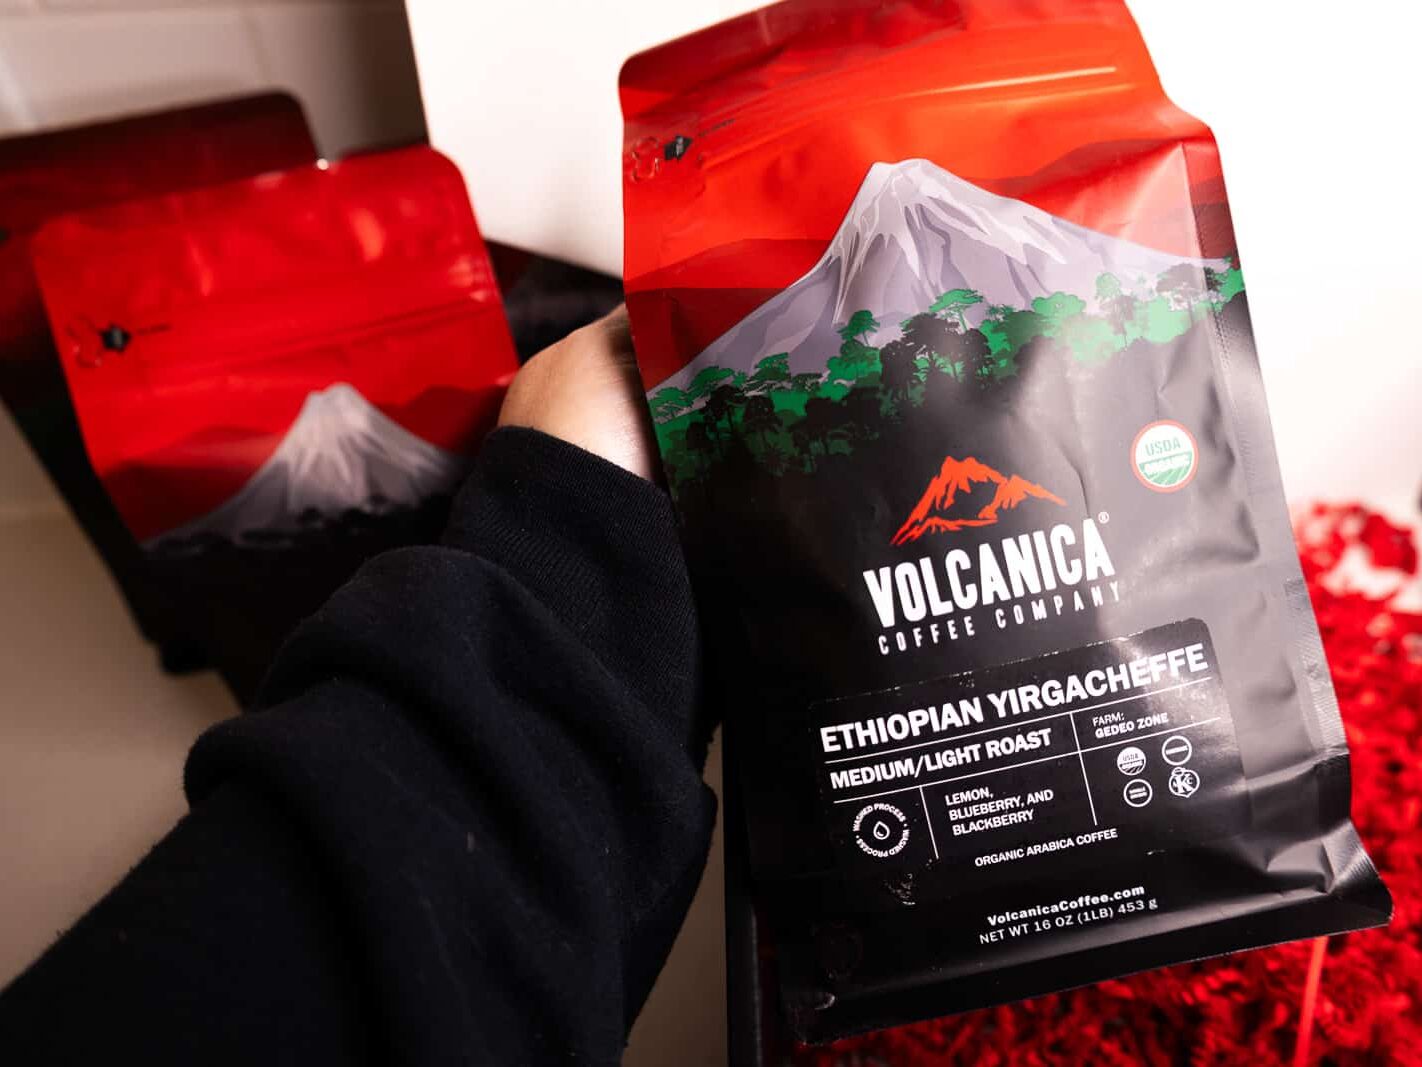 Holding Volcanica brand coffee from the gift box